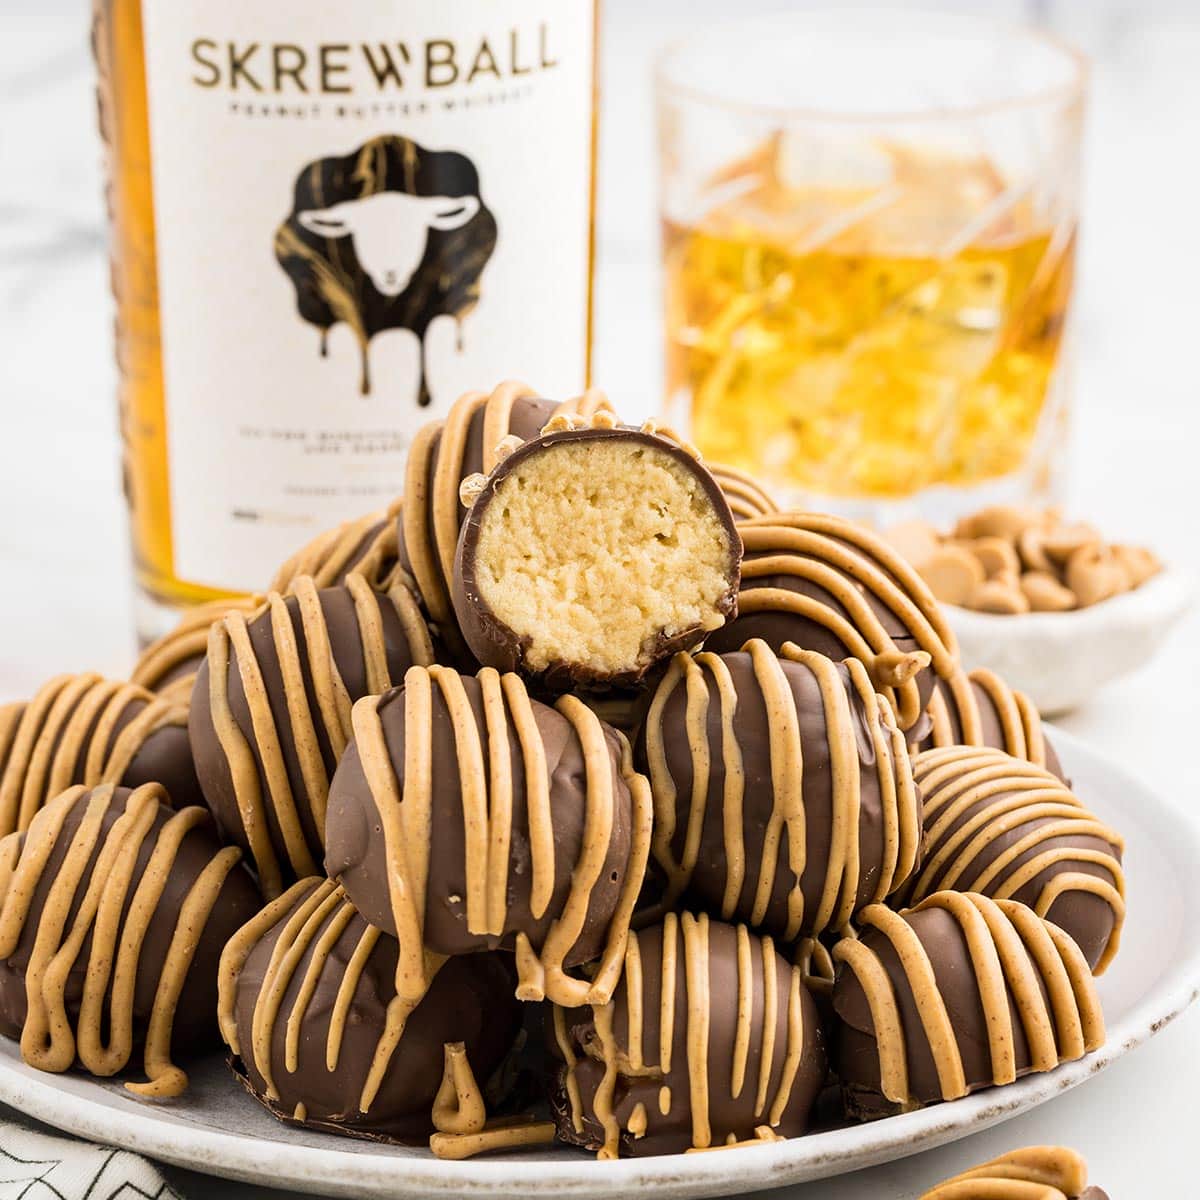 Peanut butter whiskey balls story - Pook's Pantry Recipe Blog